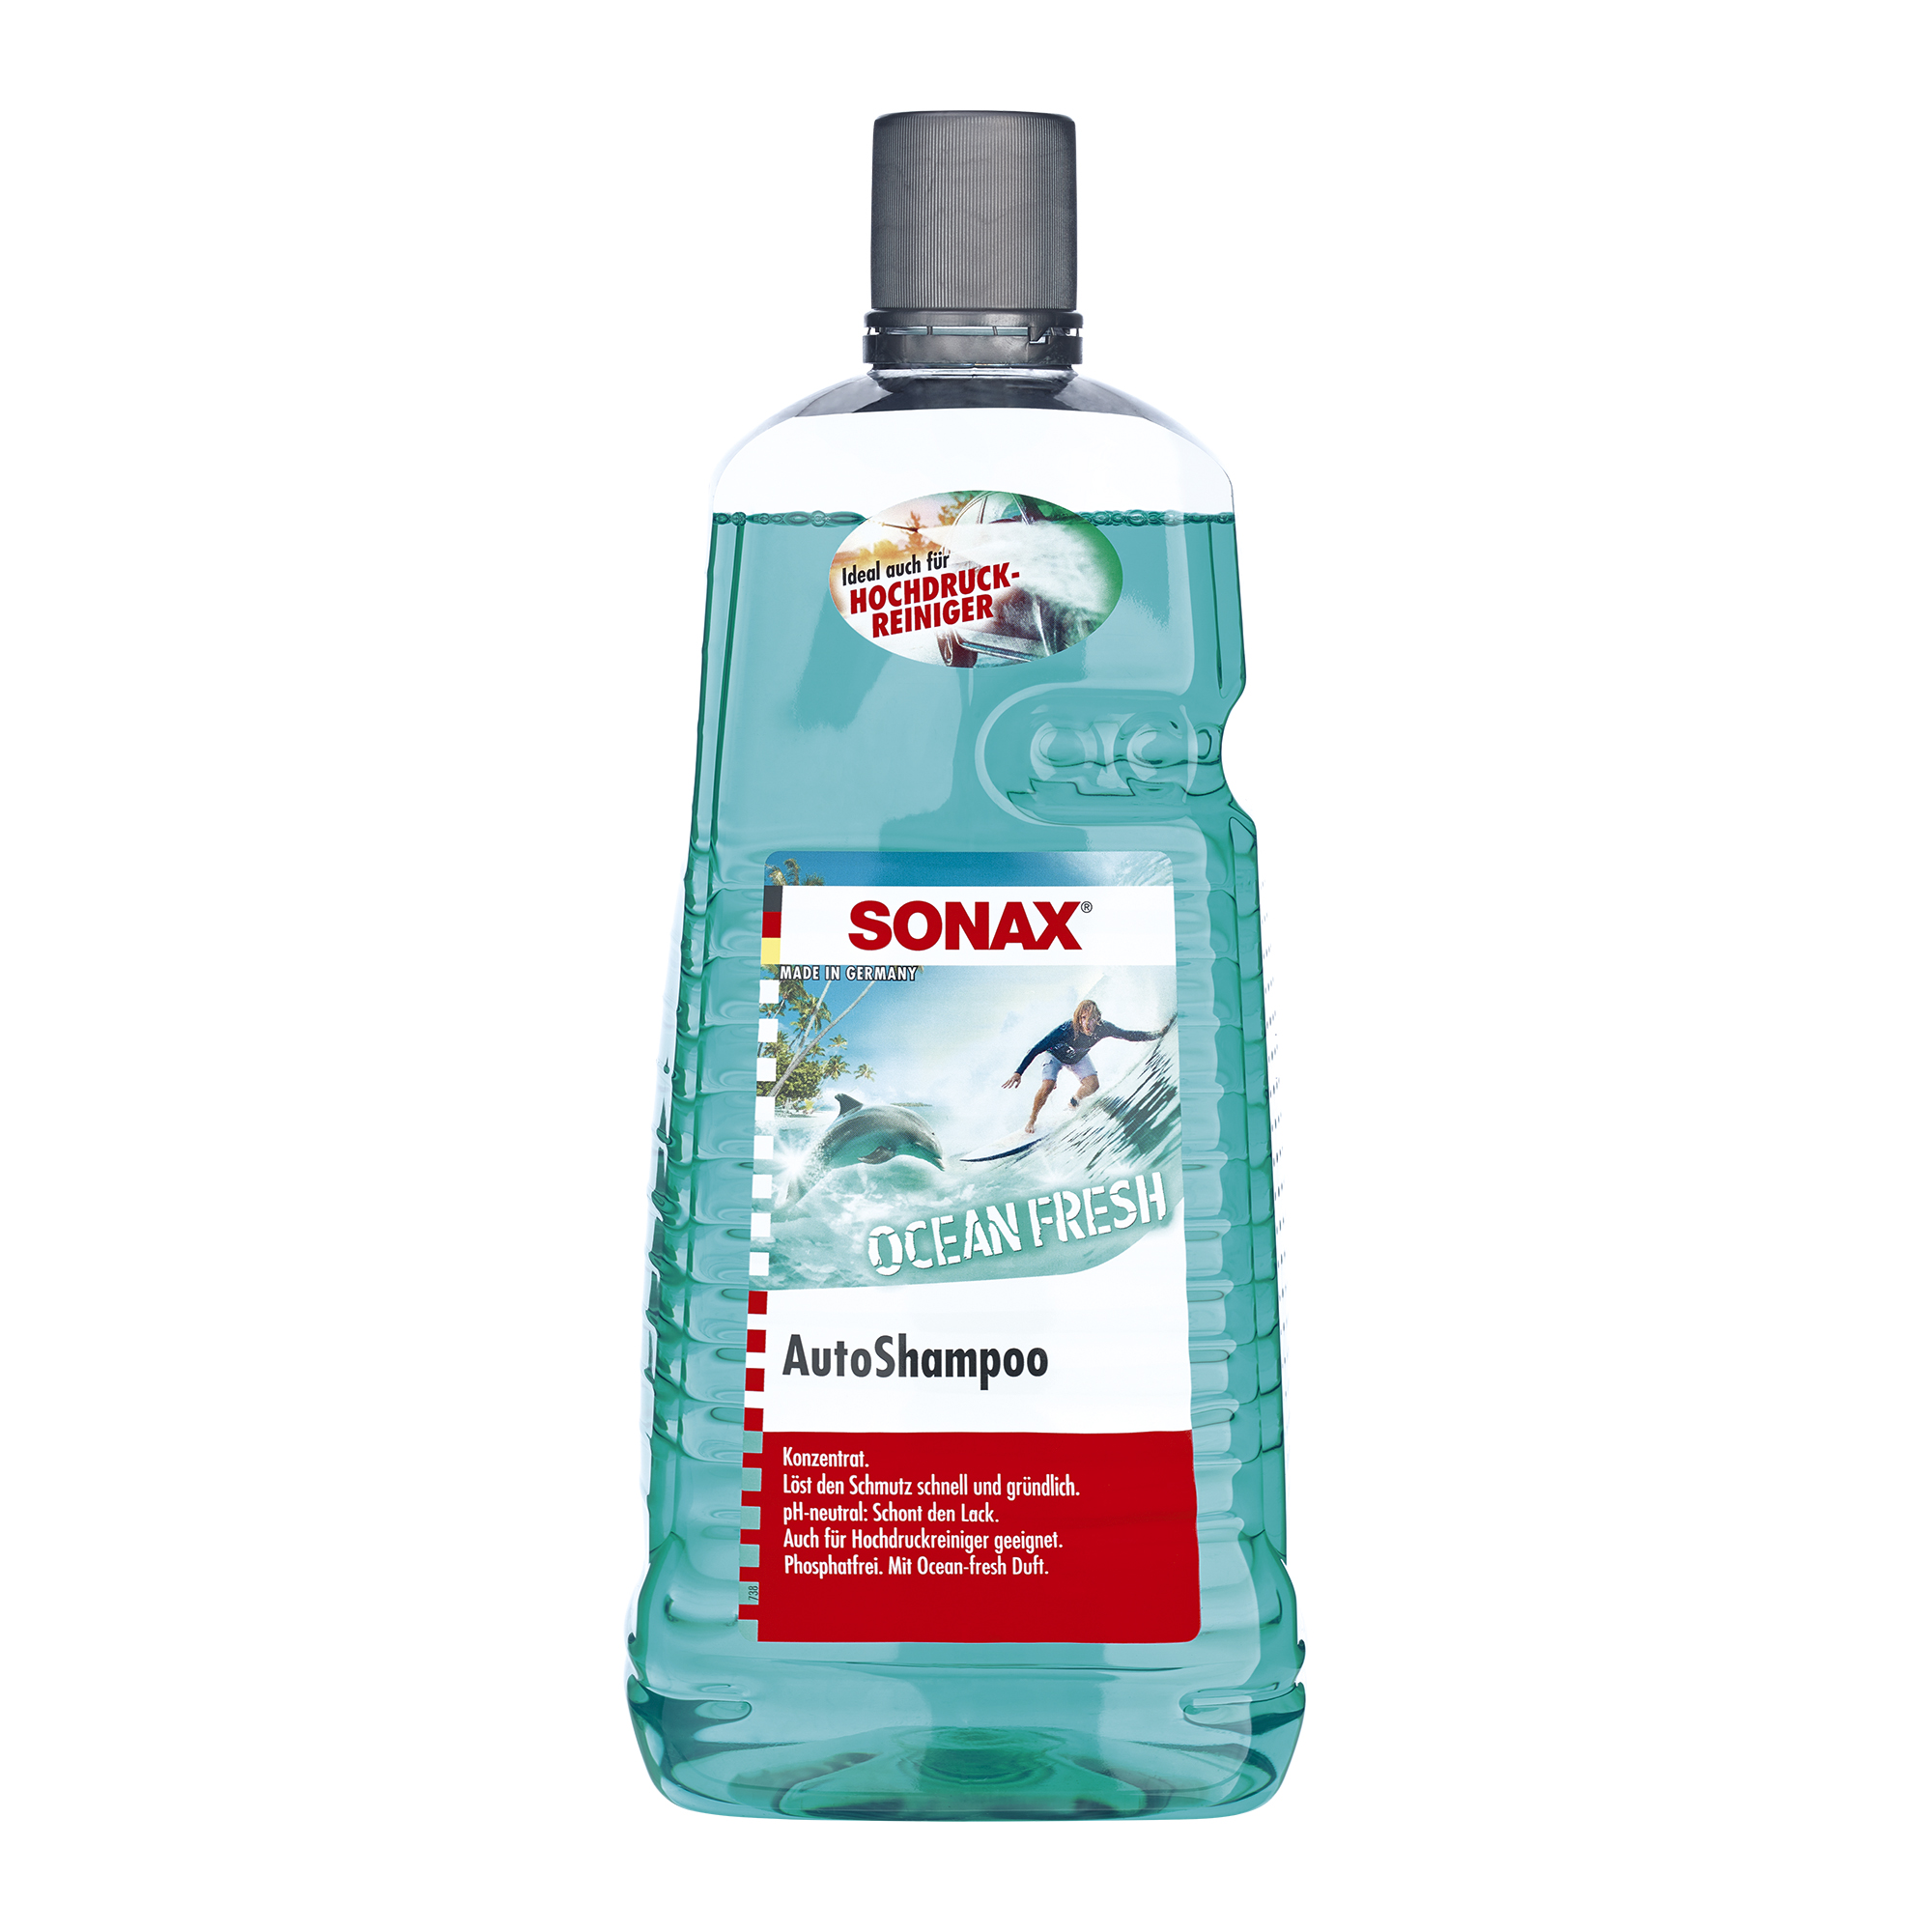 Sonax Ocean Concentrated Shampoo